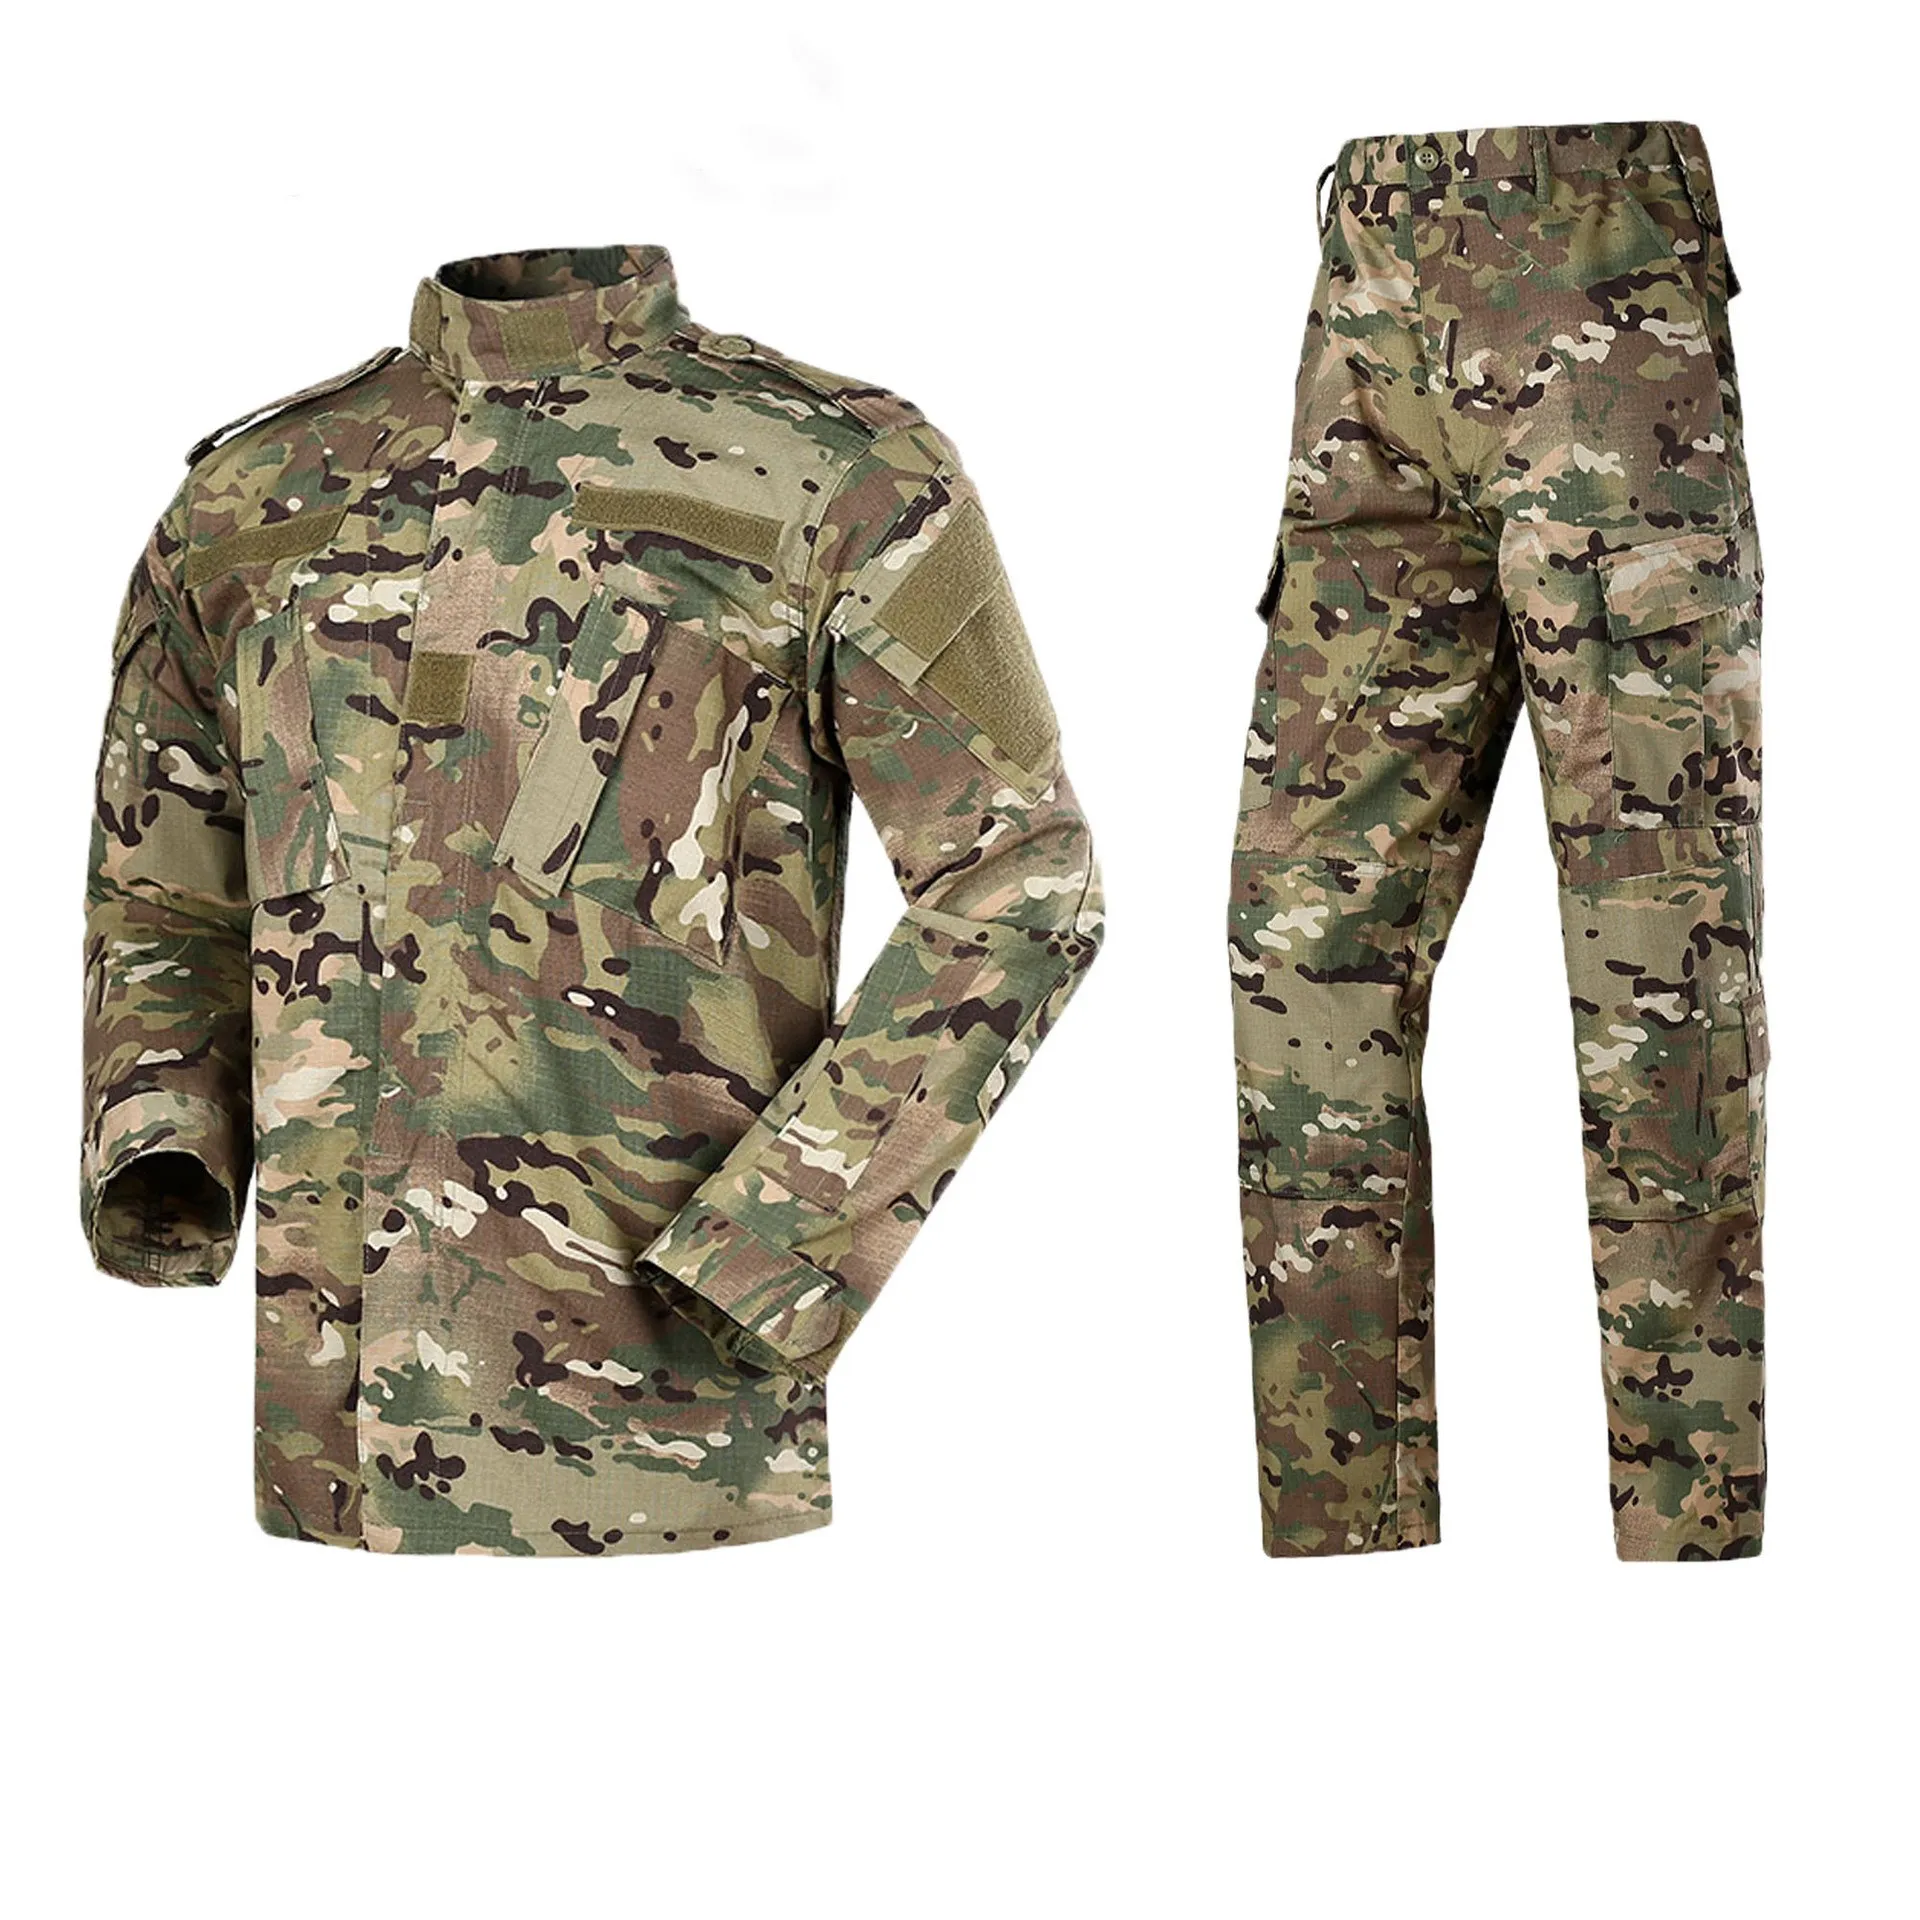 

Men's Tactical Jacket and army Combat Trousers Set Camo Woodland Hunting ACU Military Uniform